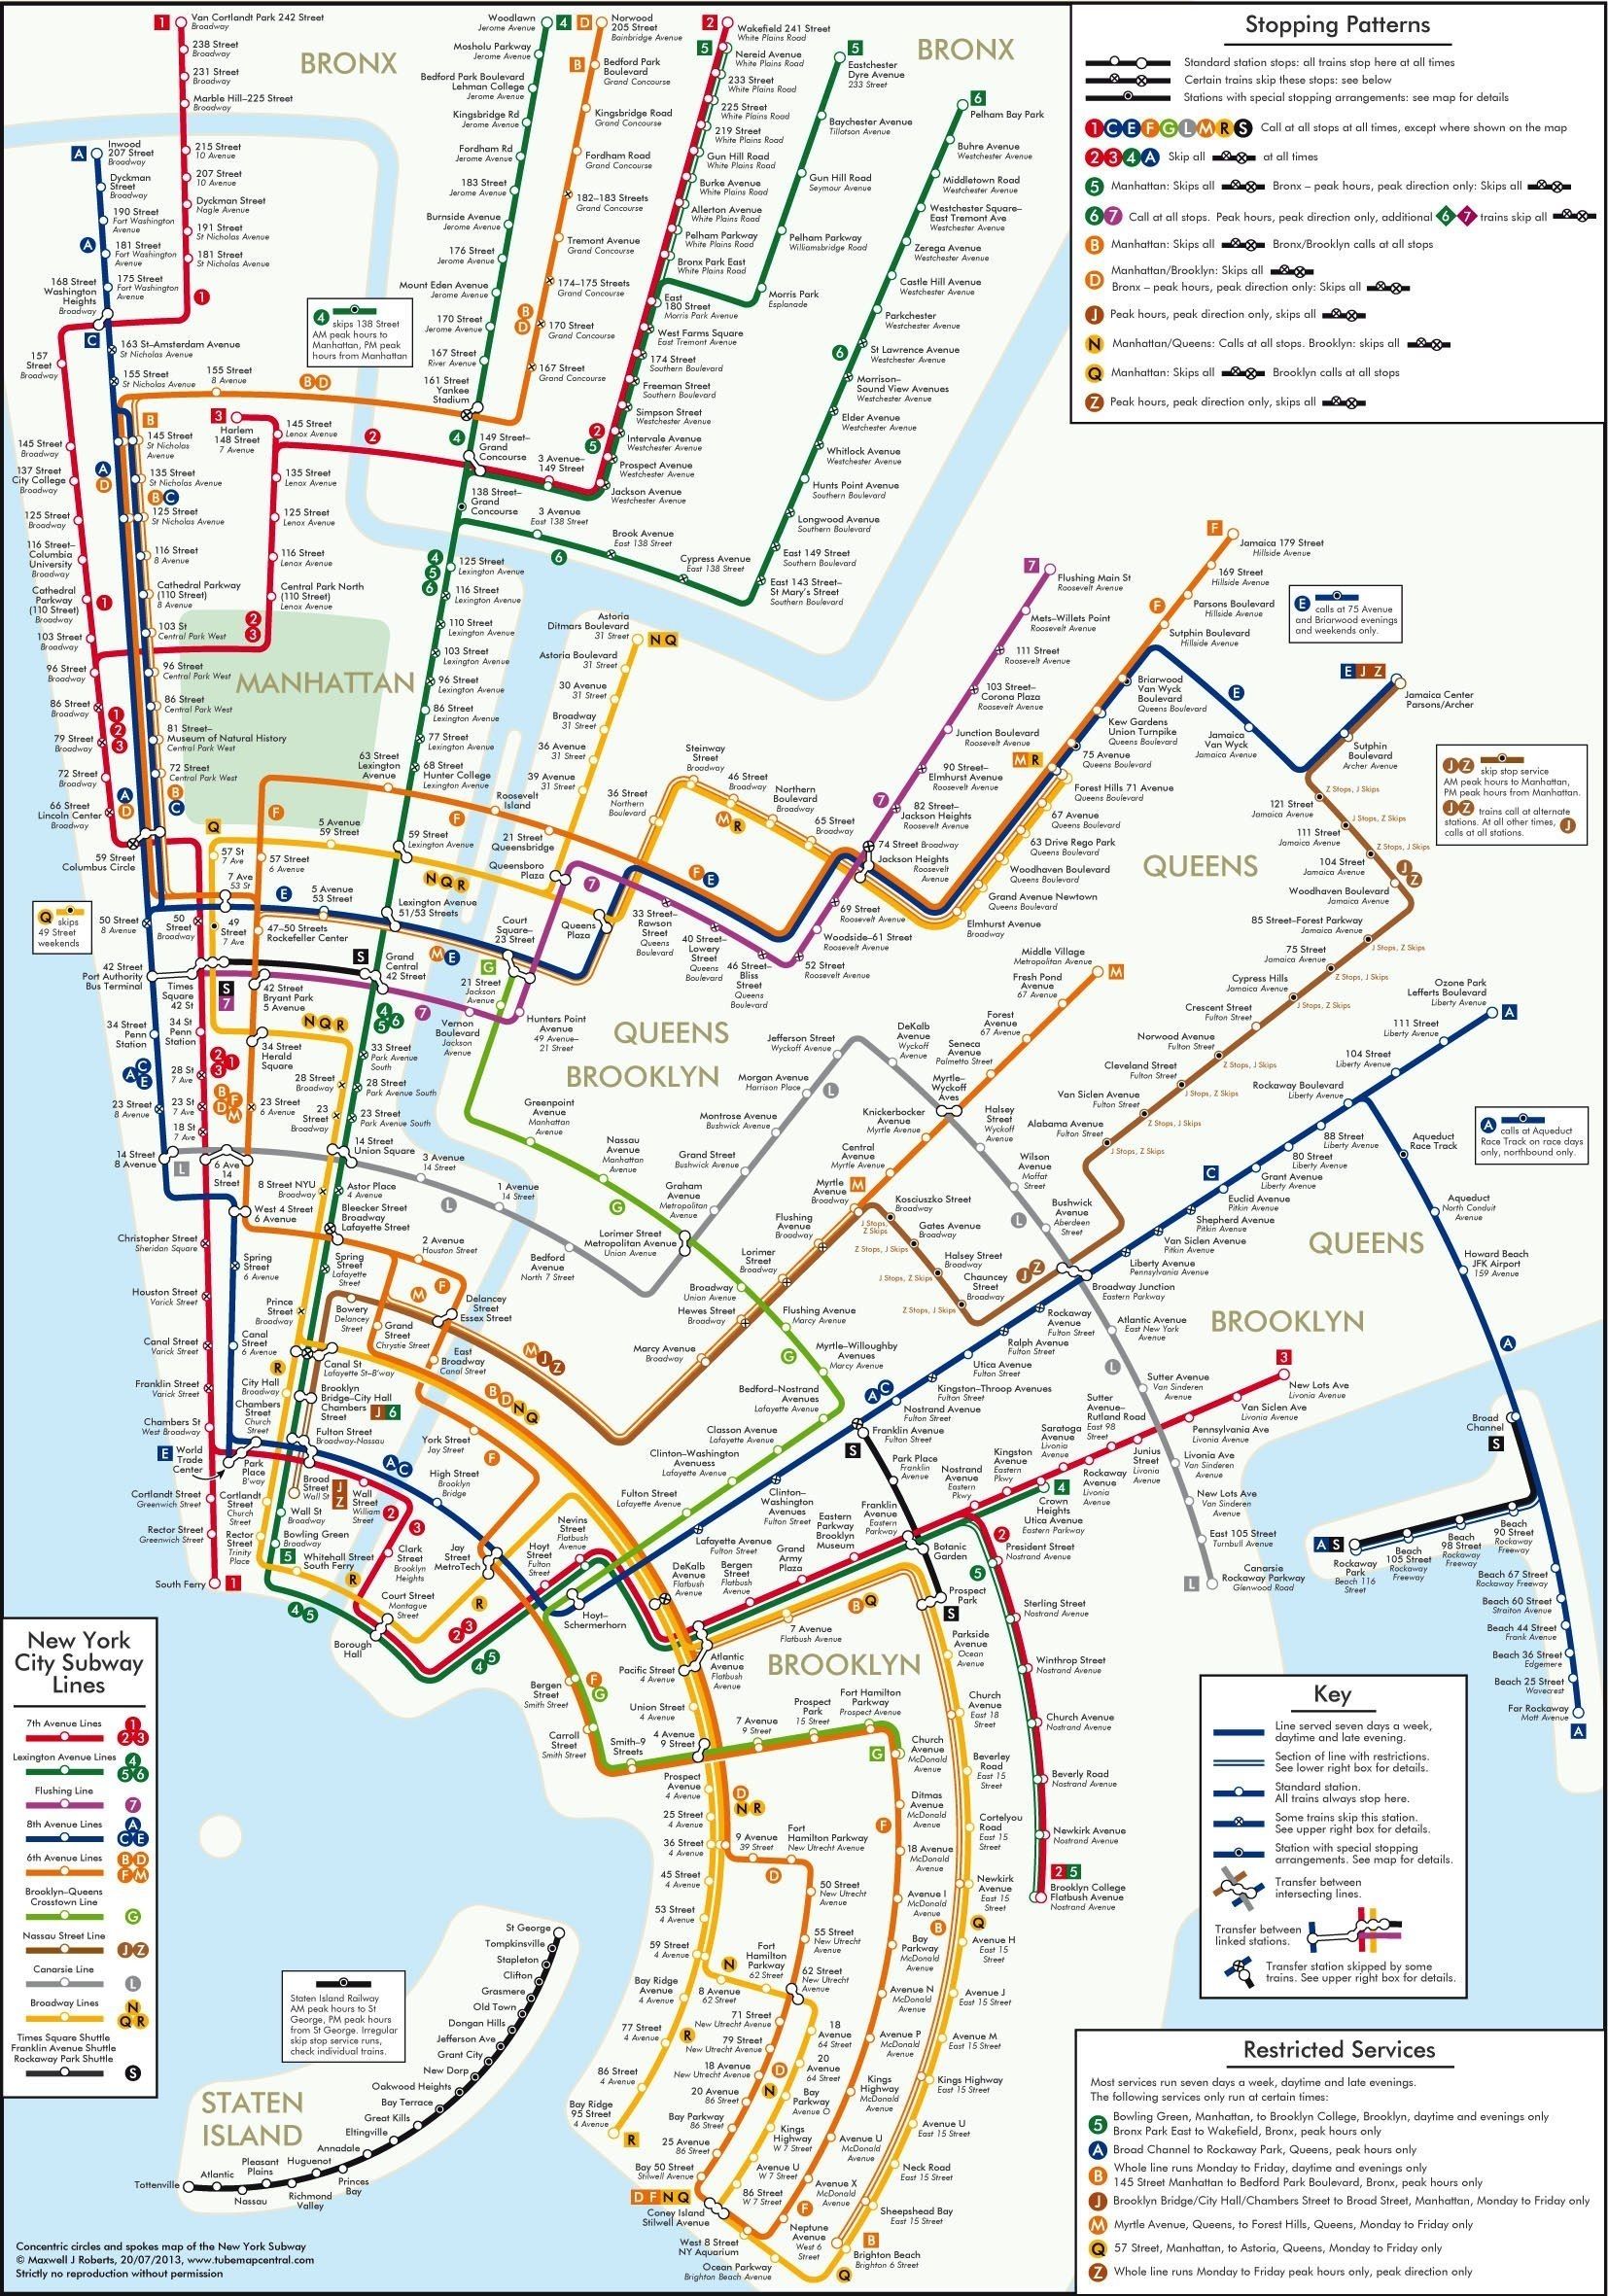 This Guy's Never Met A Map He Didn't Want To Fix | Maps | Pinterest Intended For New York Subway Map Wall Art (View 20 of 20)